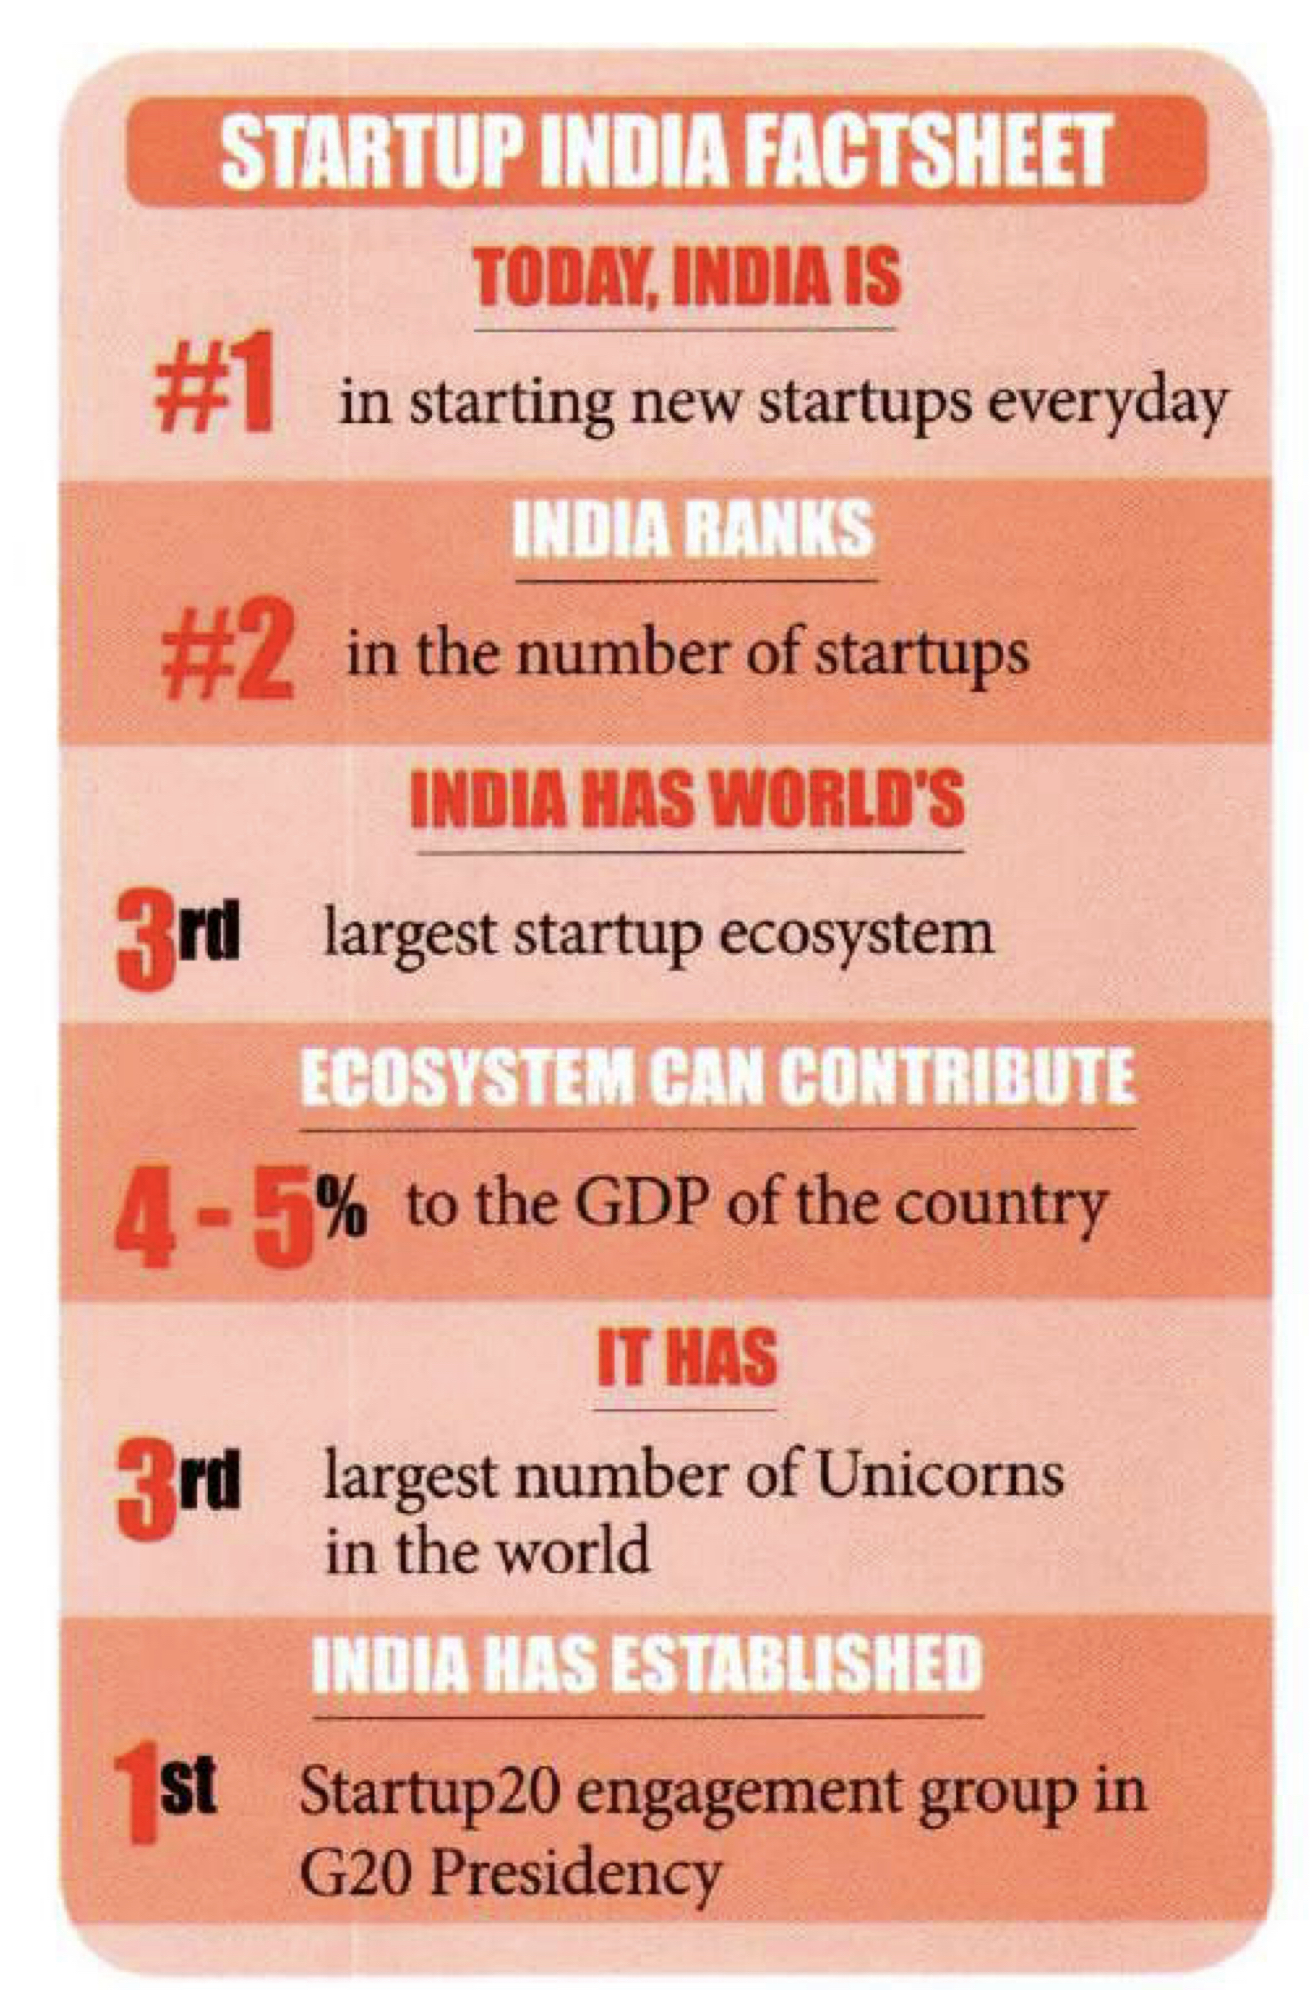 Youth in Startup Ecosystem